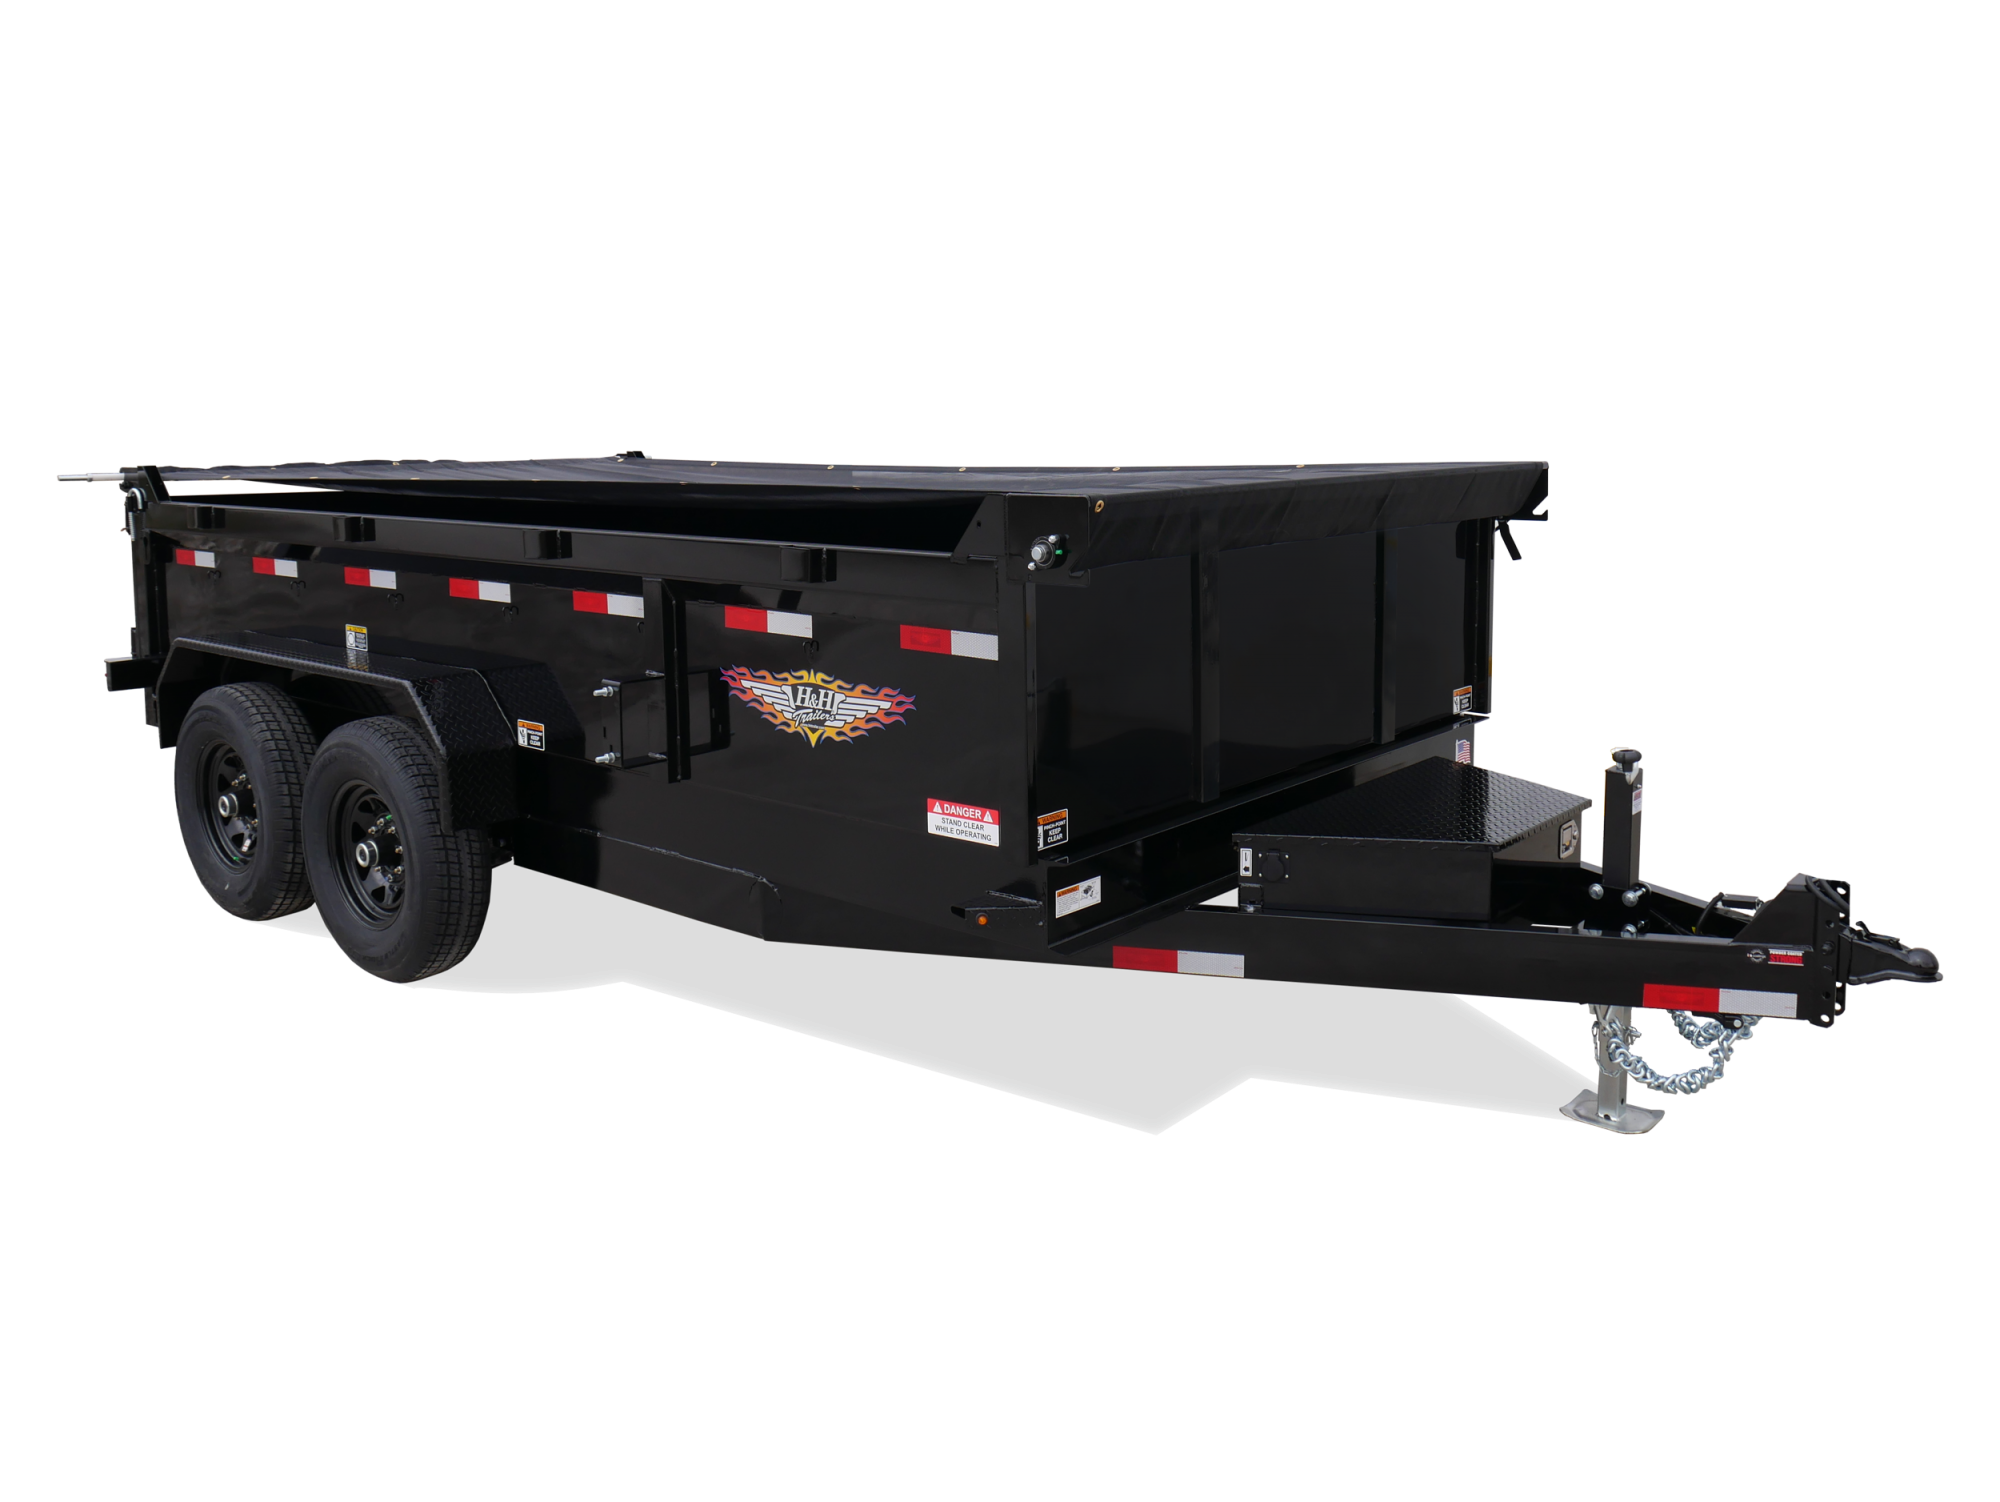 Industrial Dump Trailer - Manufactured by H&H Trailers